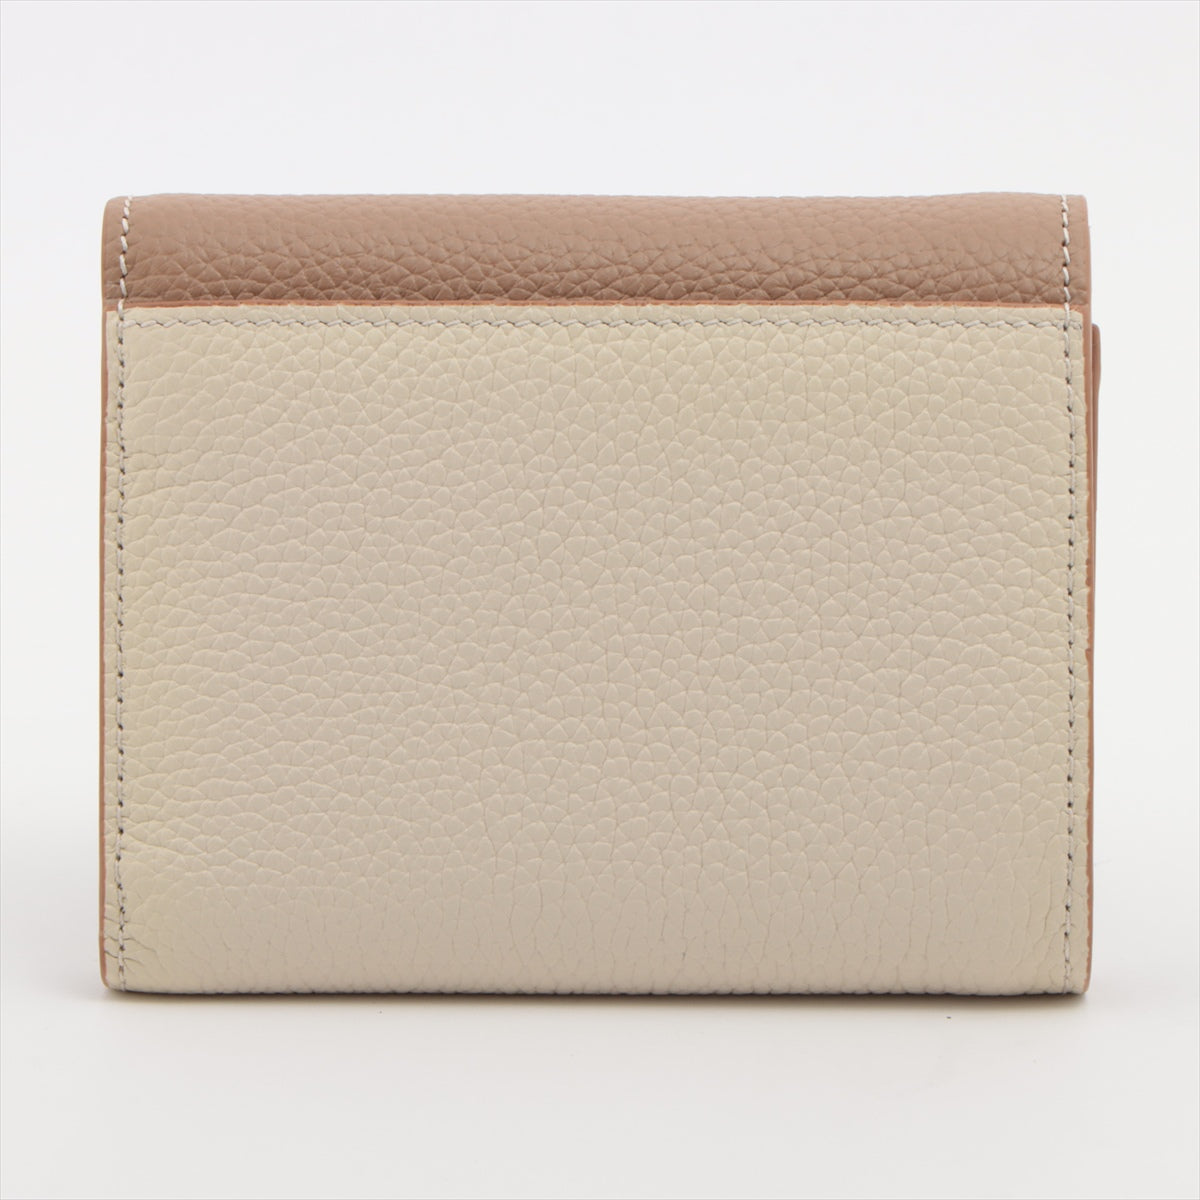 Burberry TB folding Leather Compact Wallet Beige